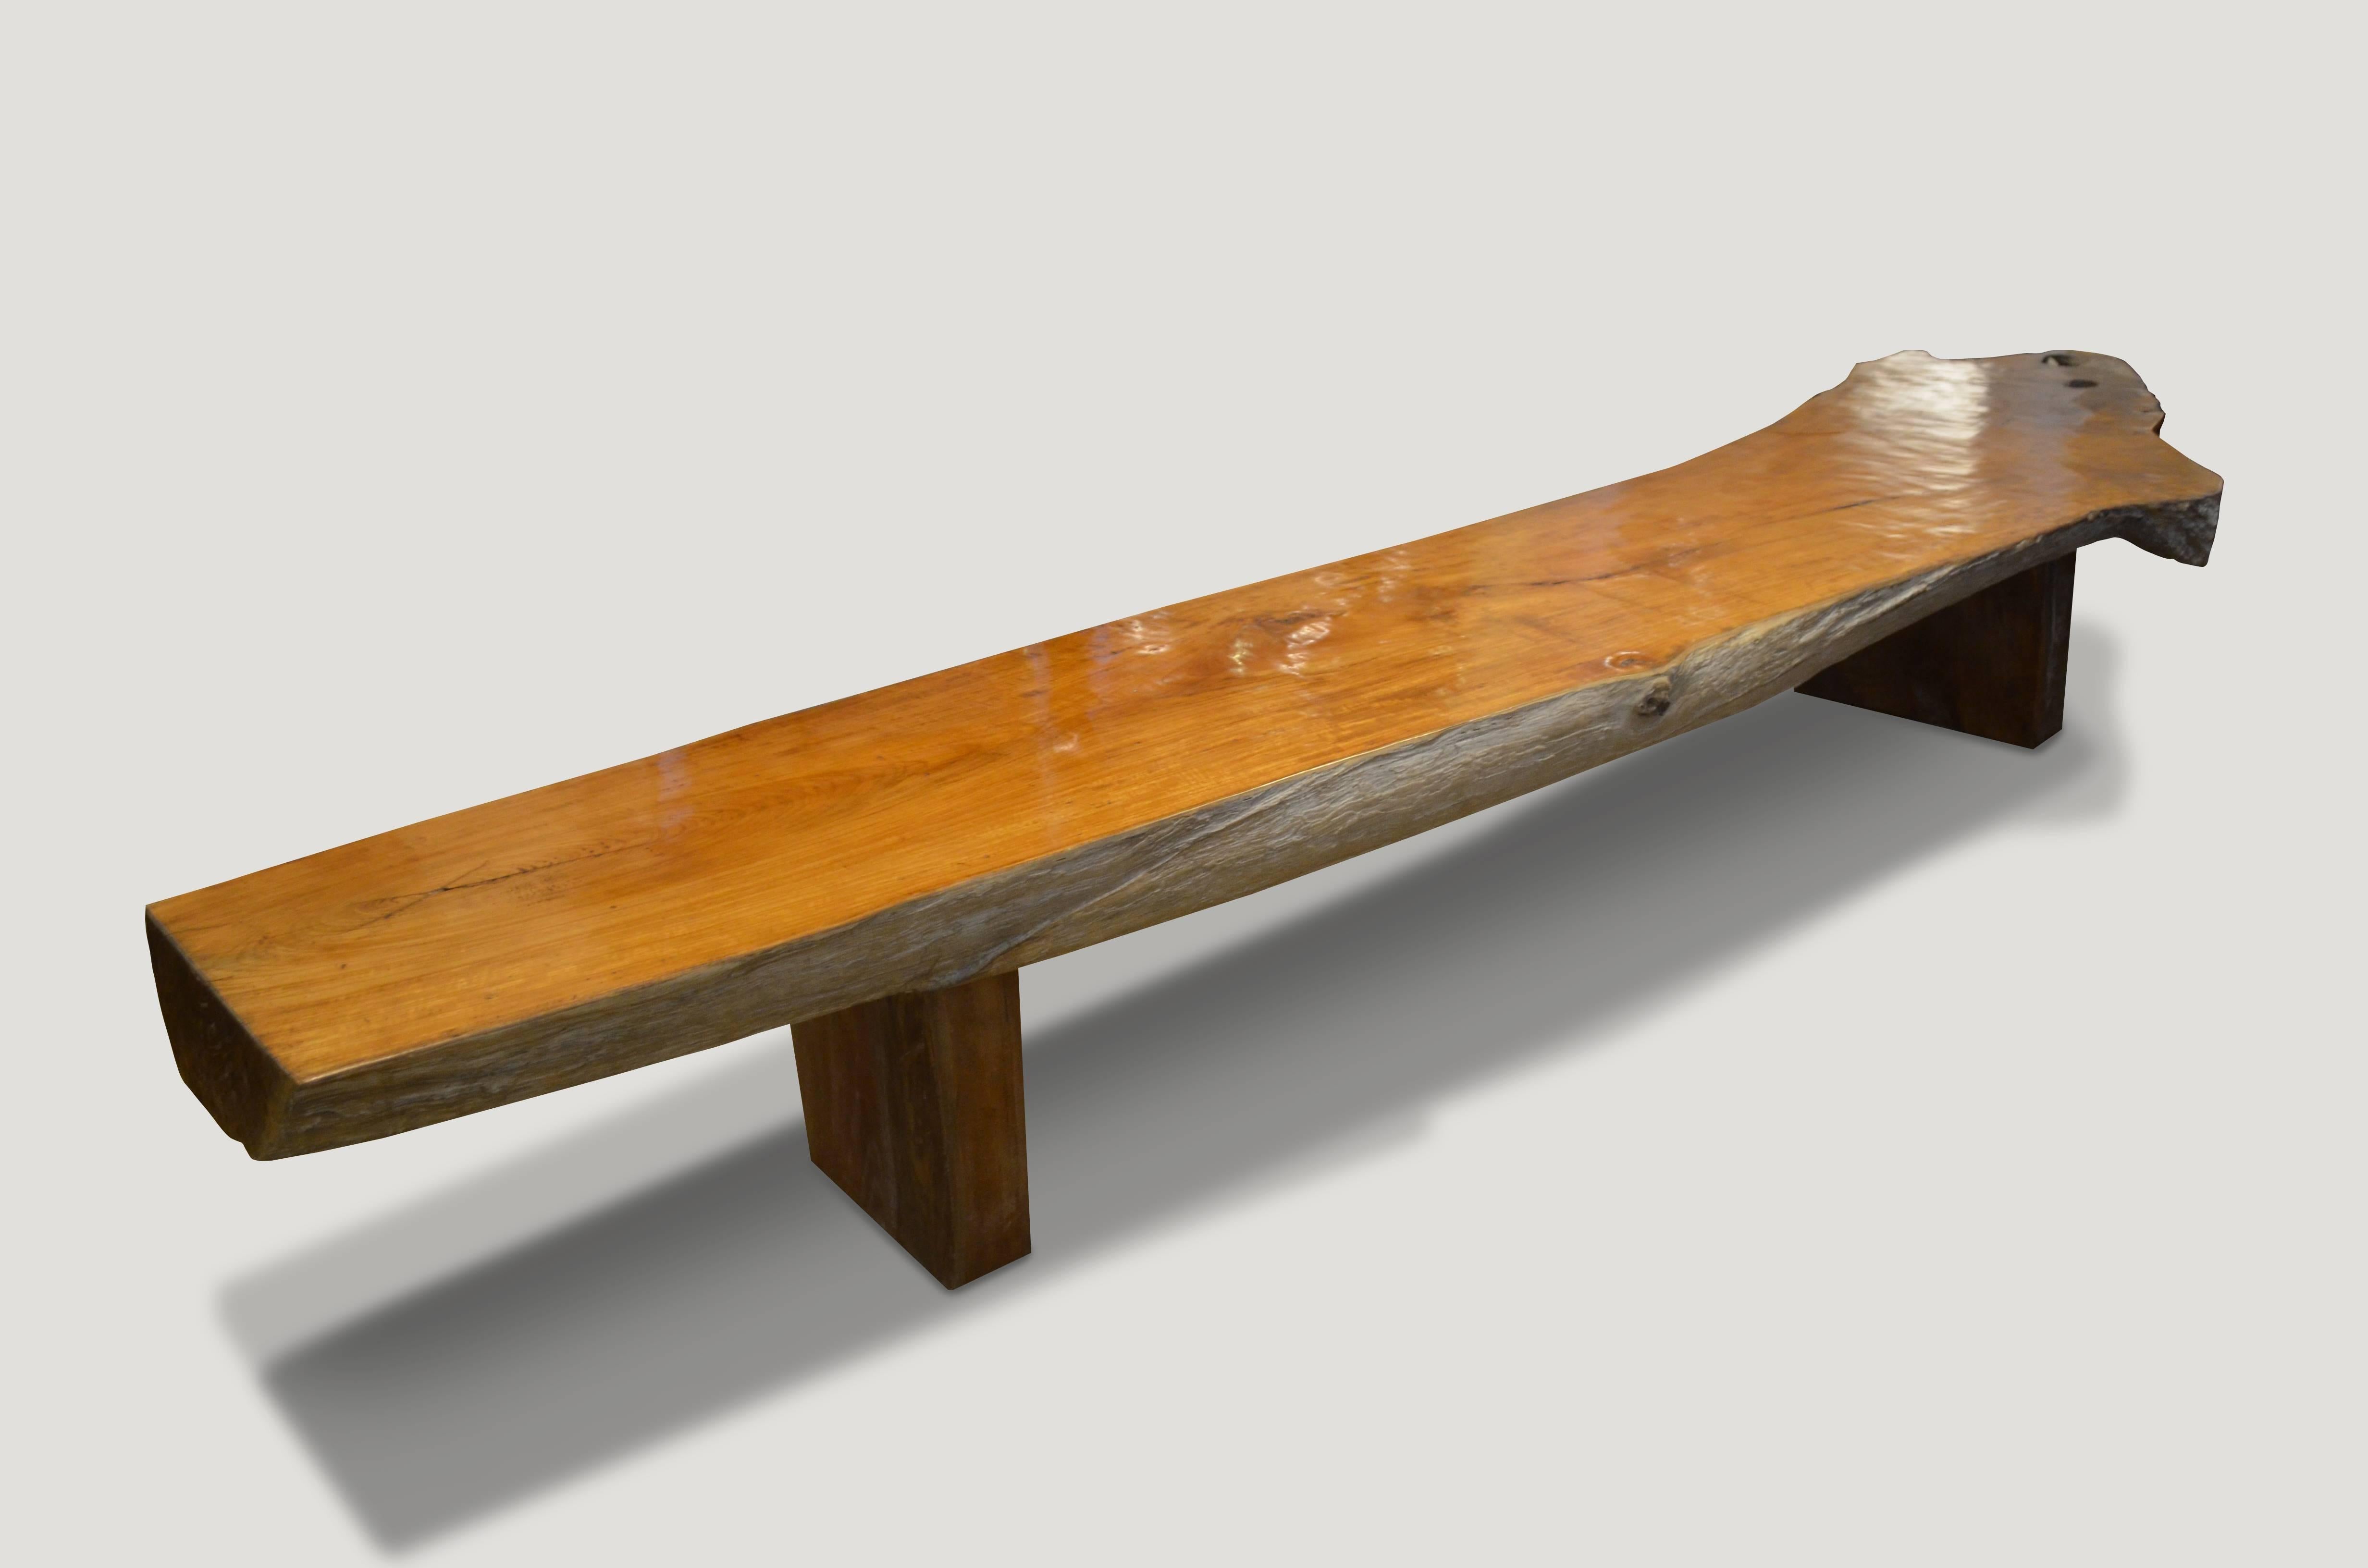 Impressive 4” single teak wood slab coffee table or bench. We have added modern Minimalist legs to this stunning organic shape. The top was polished to enhance the stunning grain in the reclaimed teak wood, whilst leaving the sides raw in contrast.